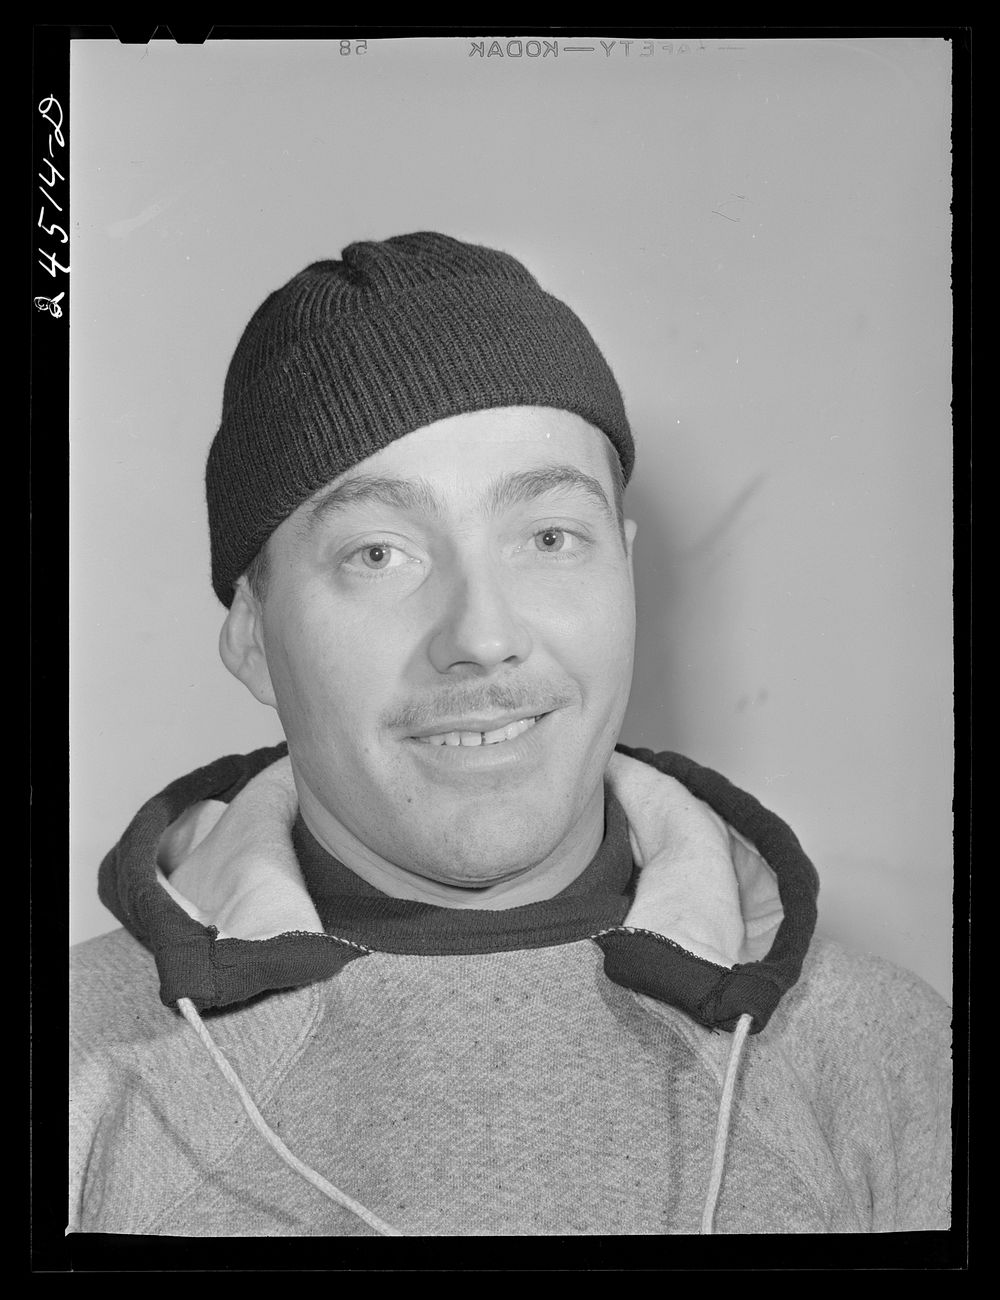 Merchant seaman. New York City, New York. Sourced from the Library of Congress.